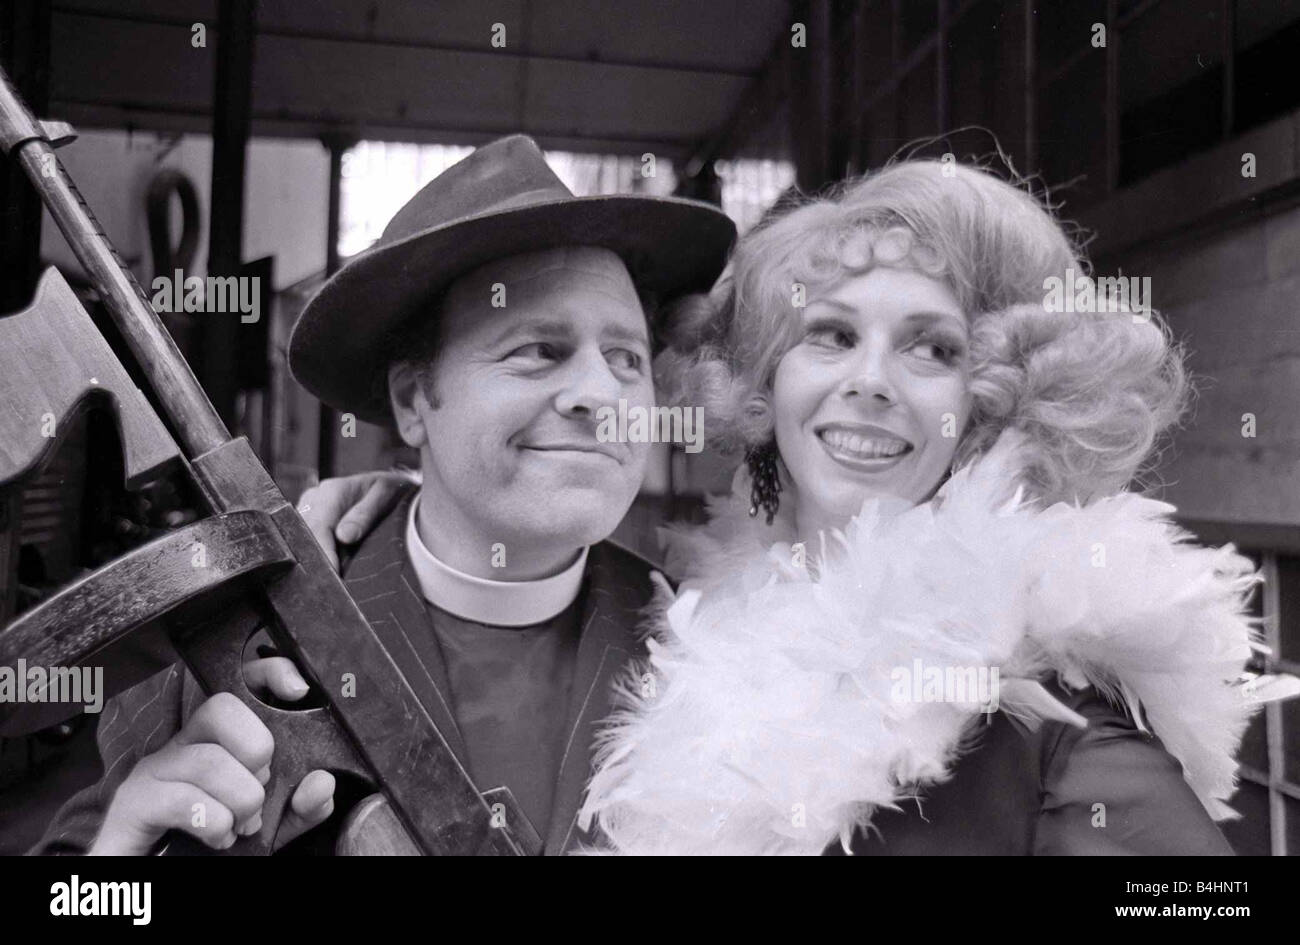 Marion Montgomery Jazz Singer October 1969 Pictured with Actor Mike Segal both star in the Cole Porter comedy musical Anything Goes which opens tonight at the Palace 1960s Stock Photo